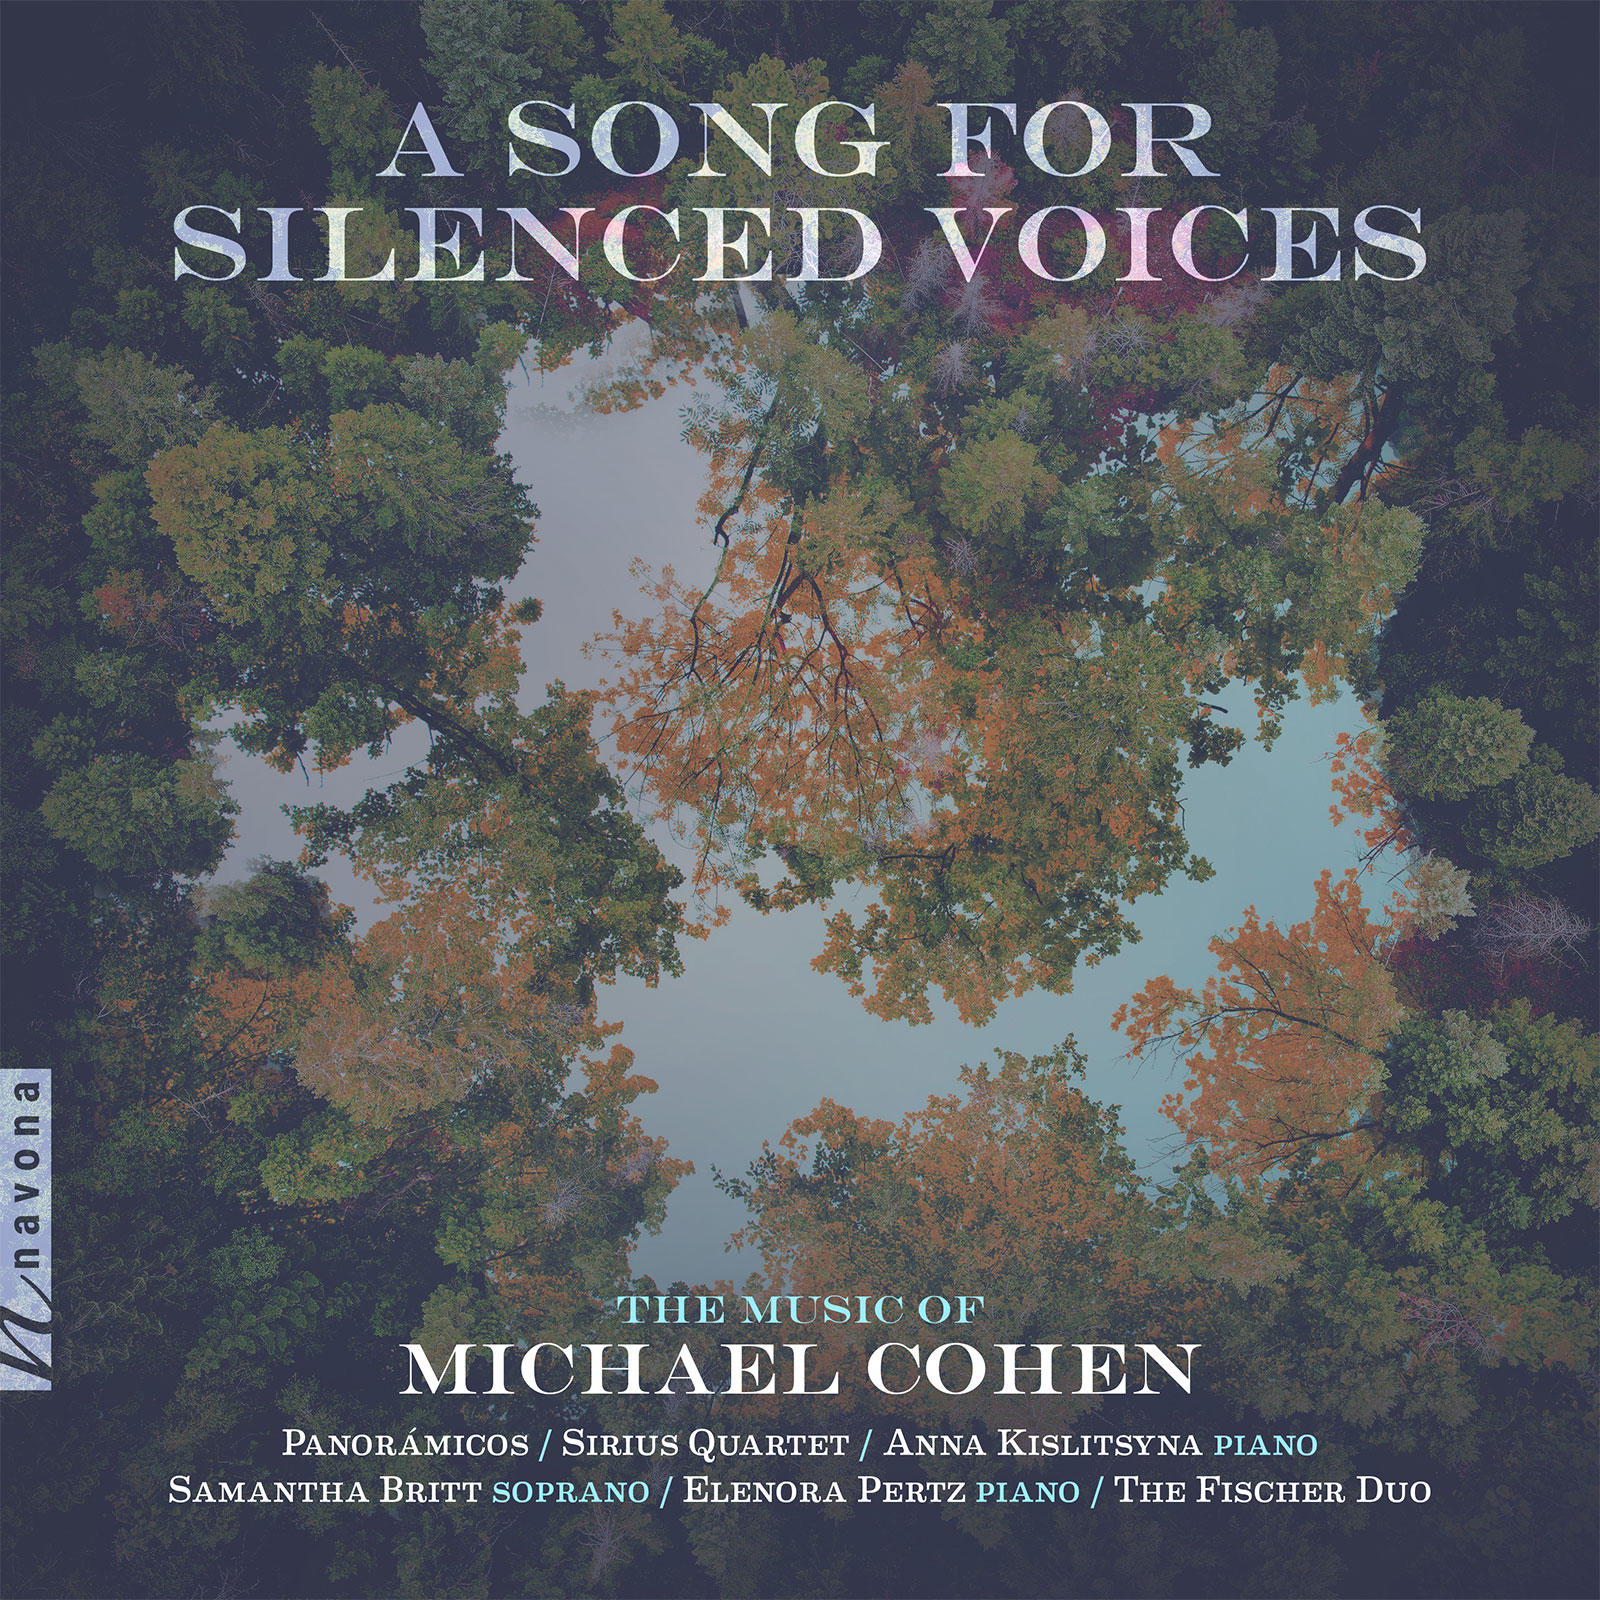 A Song For Silenced Voices